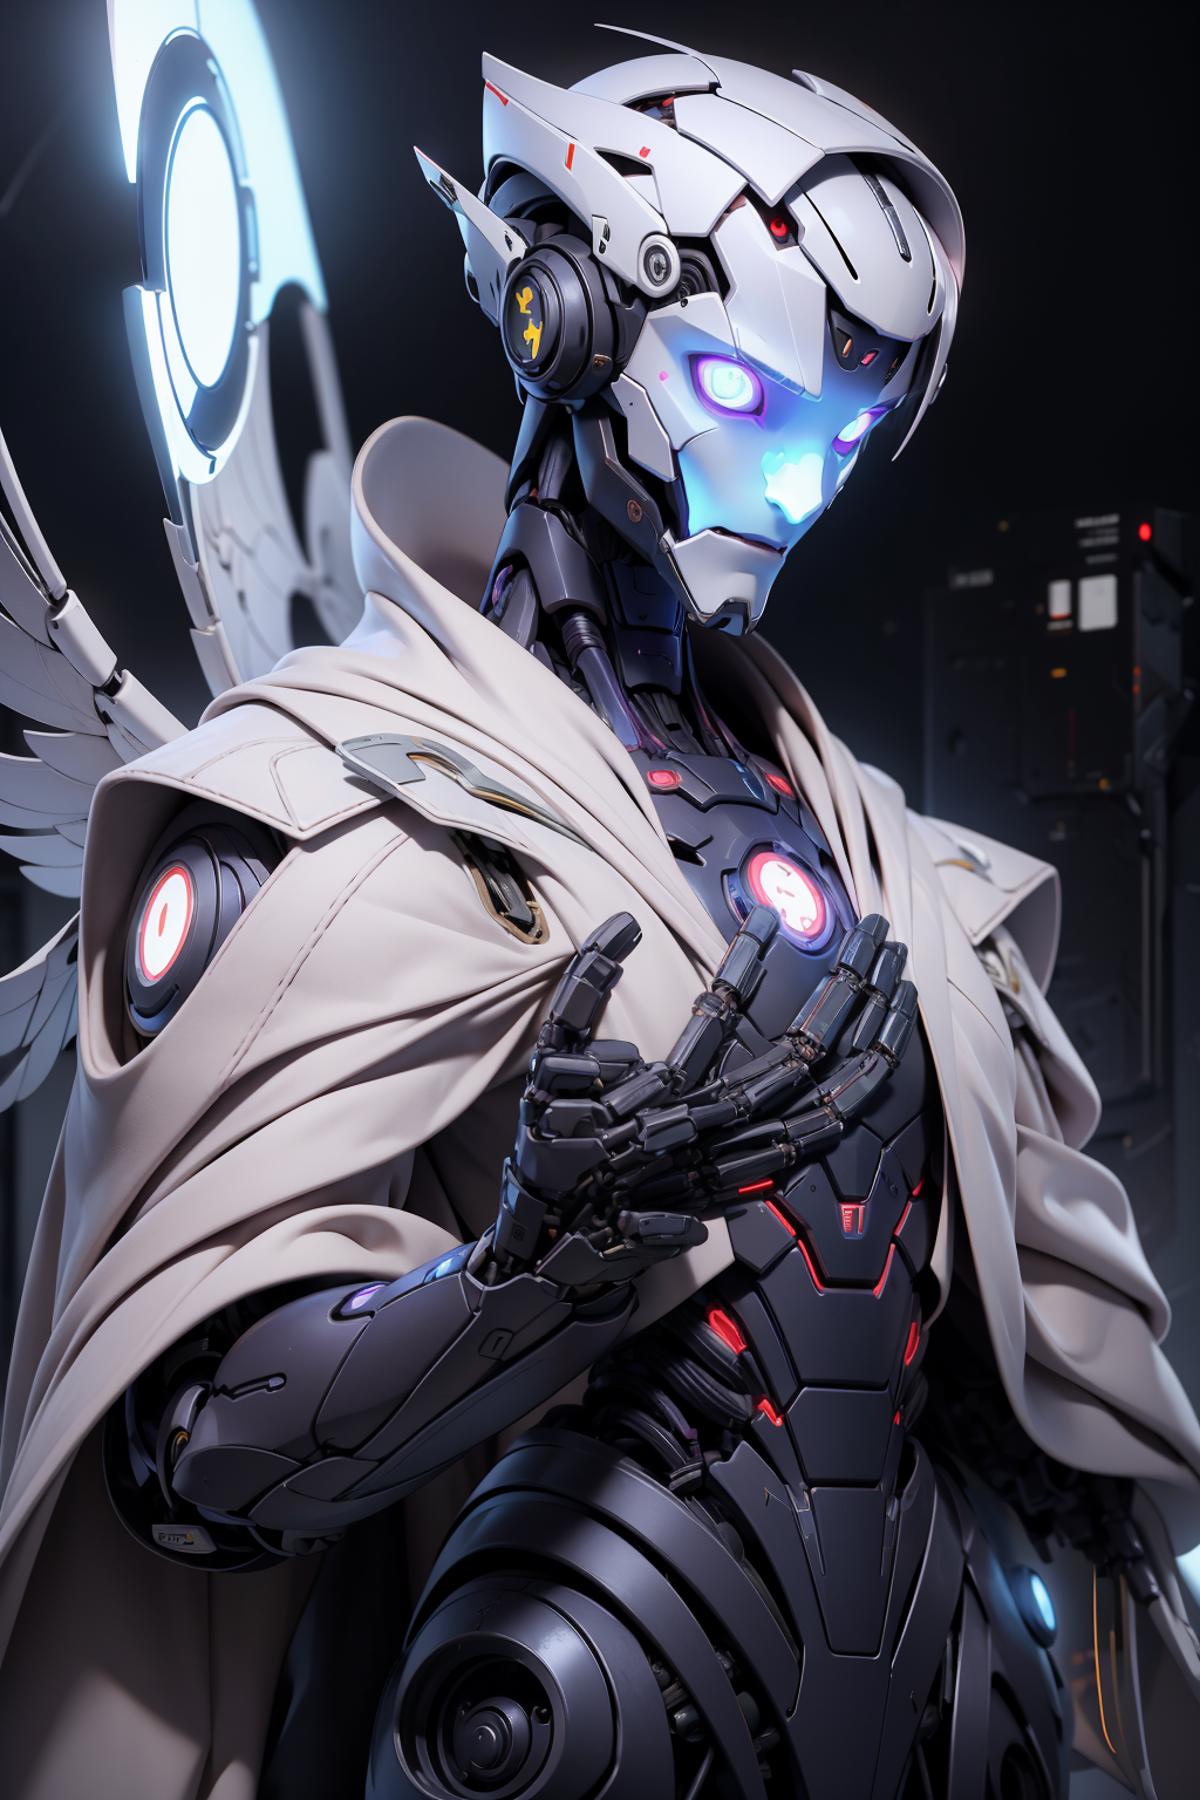 An artistic rendering of a robot wearing a white coat and wings, with its chest opened, revealing a glowing heart.